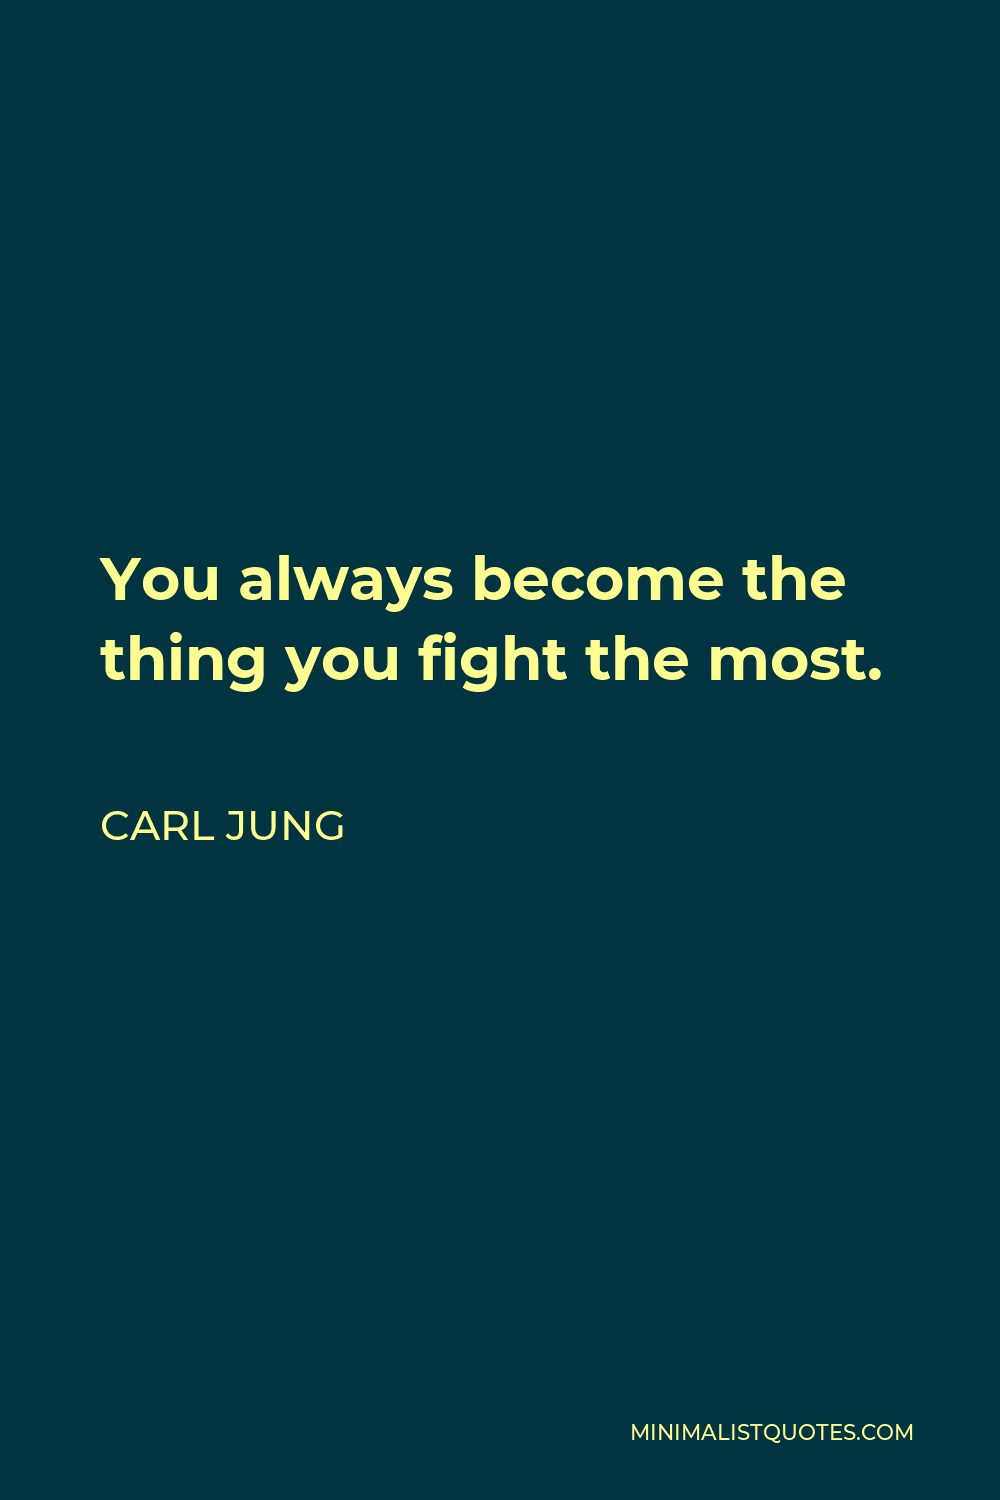 Carl Jung Quote - You always become the thing you fight the most.